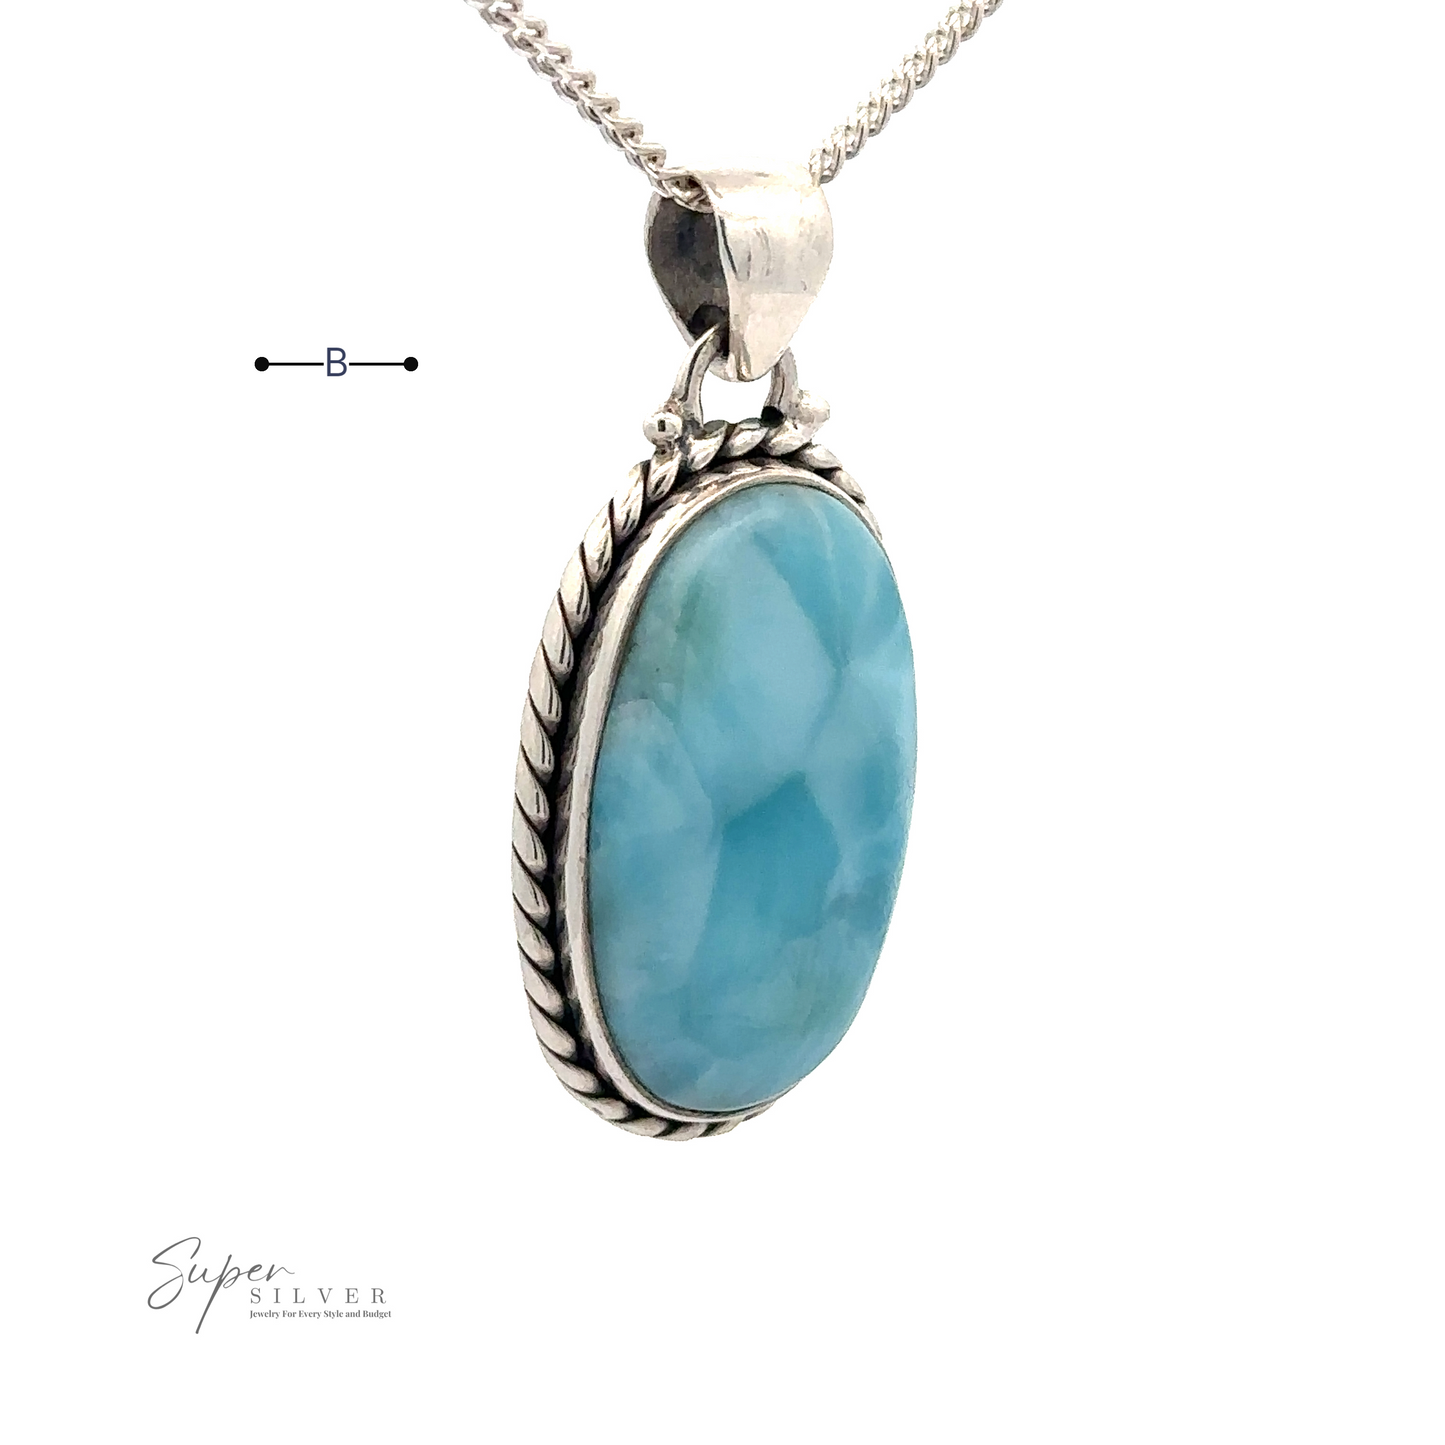 
                  
                    A **Larimar Oval Pendant with Ball or Rope Border** is attached to a sterling silver chain. The image includes the logo "Super Silver" in the lower left corner.
                  
                